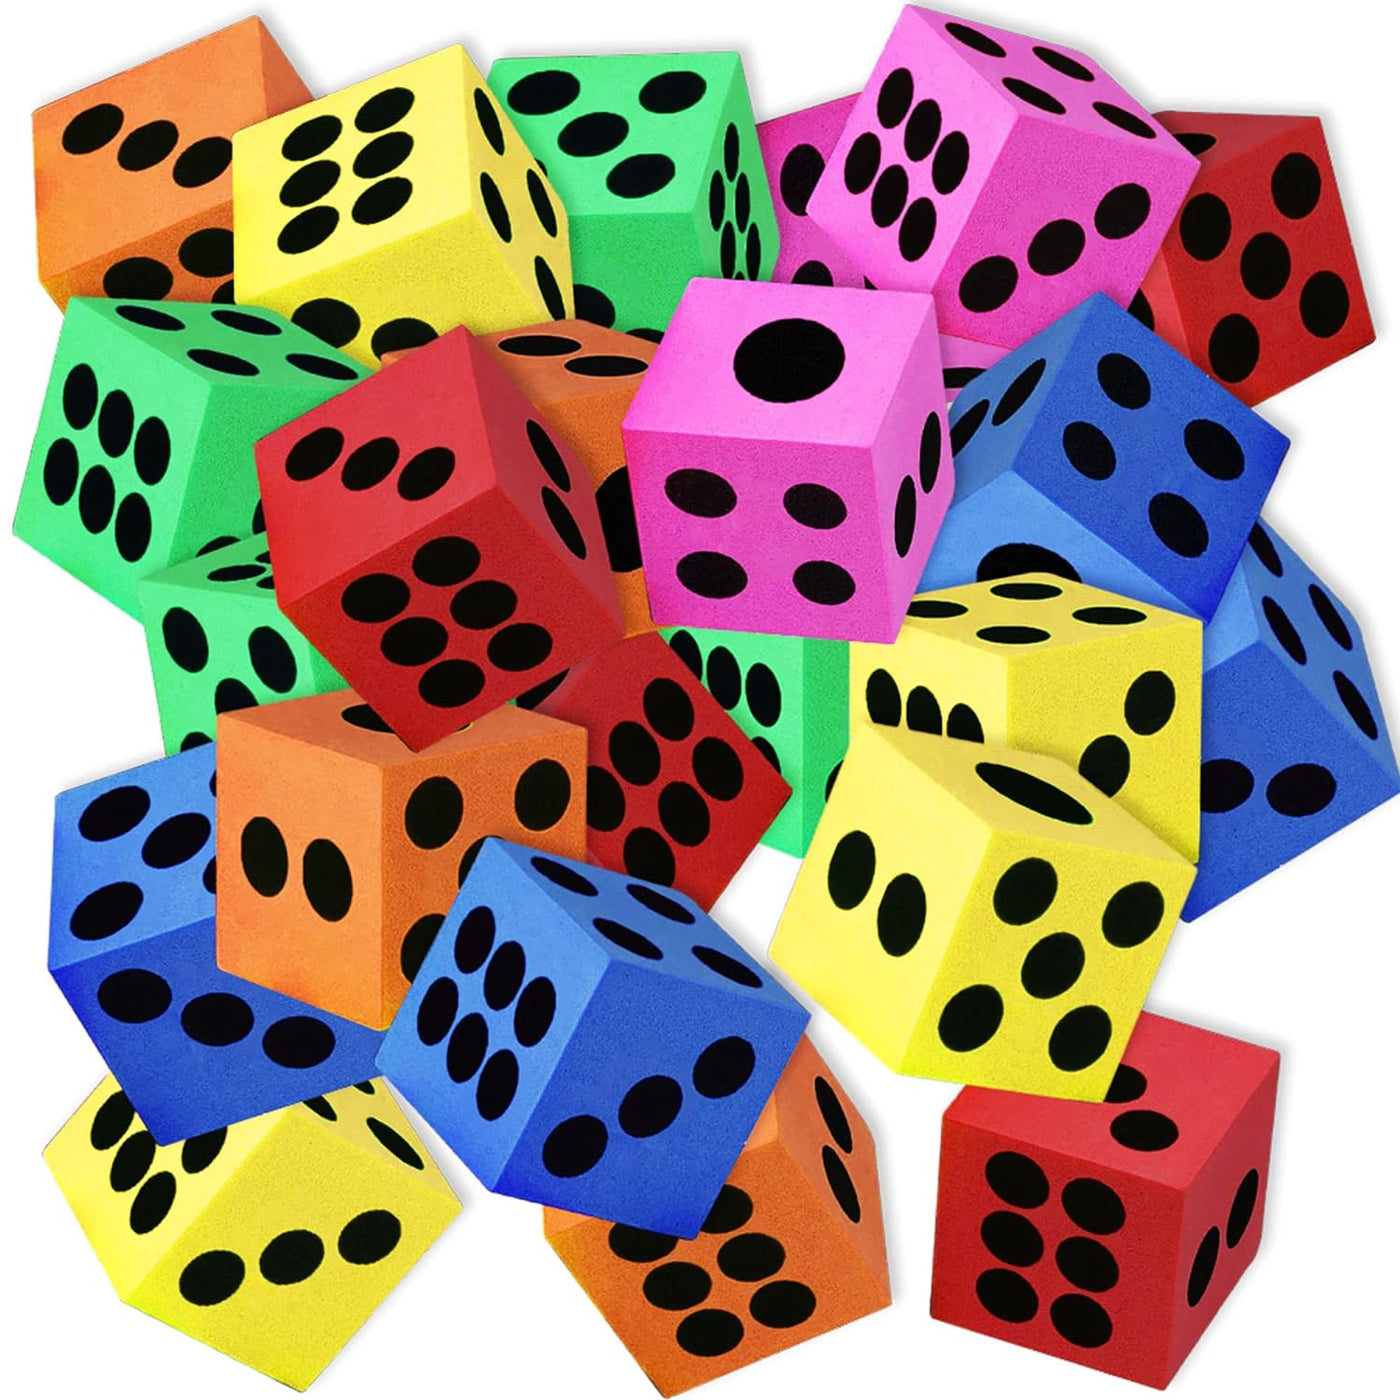 Colored Foam Dice Set - Pack of 24-1.5 Inches Big